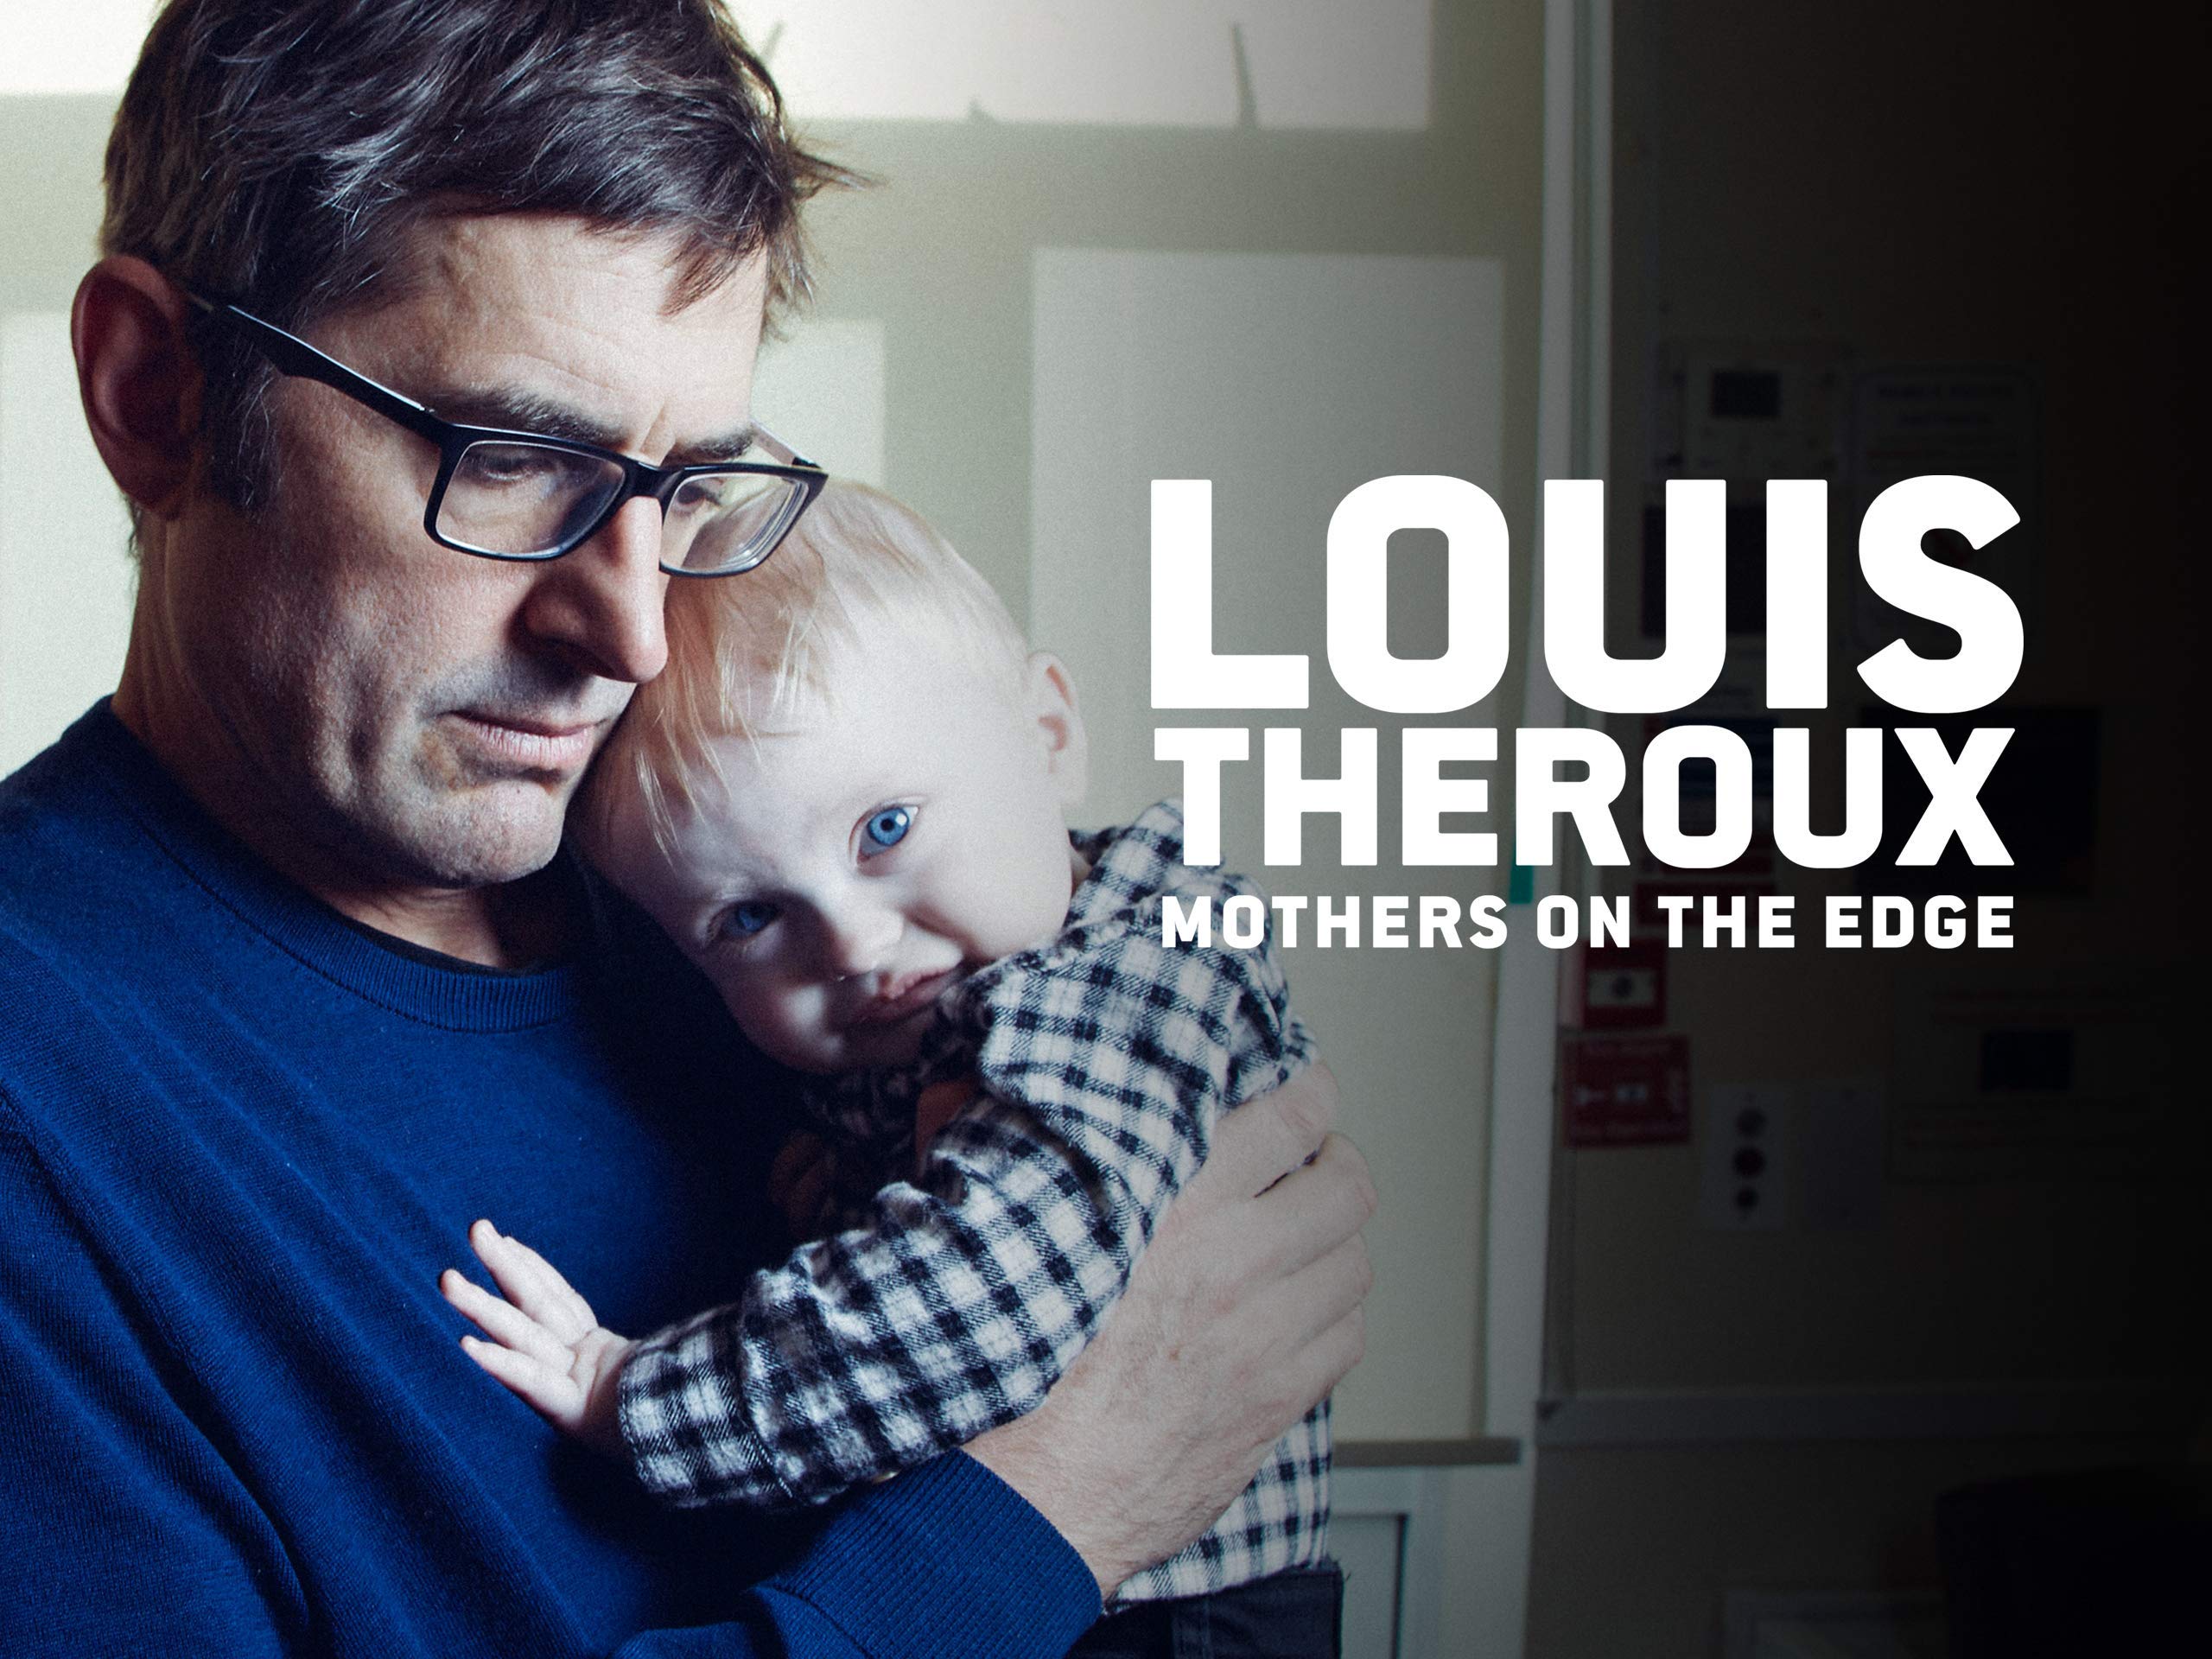 Louis Theroux's documentary "Mothers on the Edge" poster